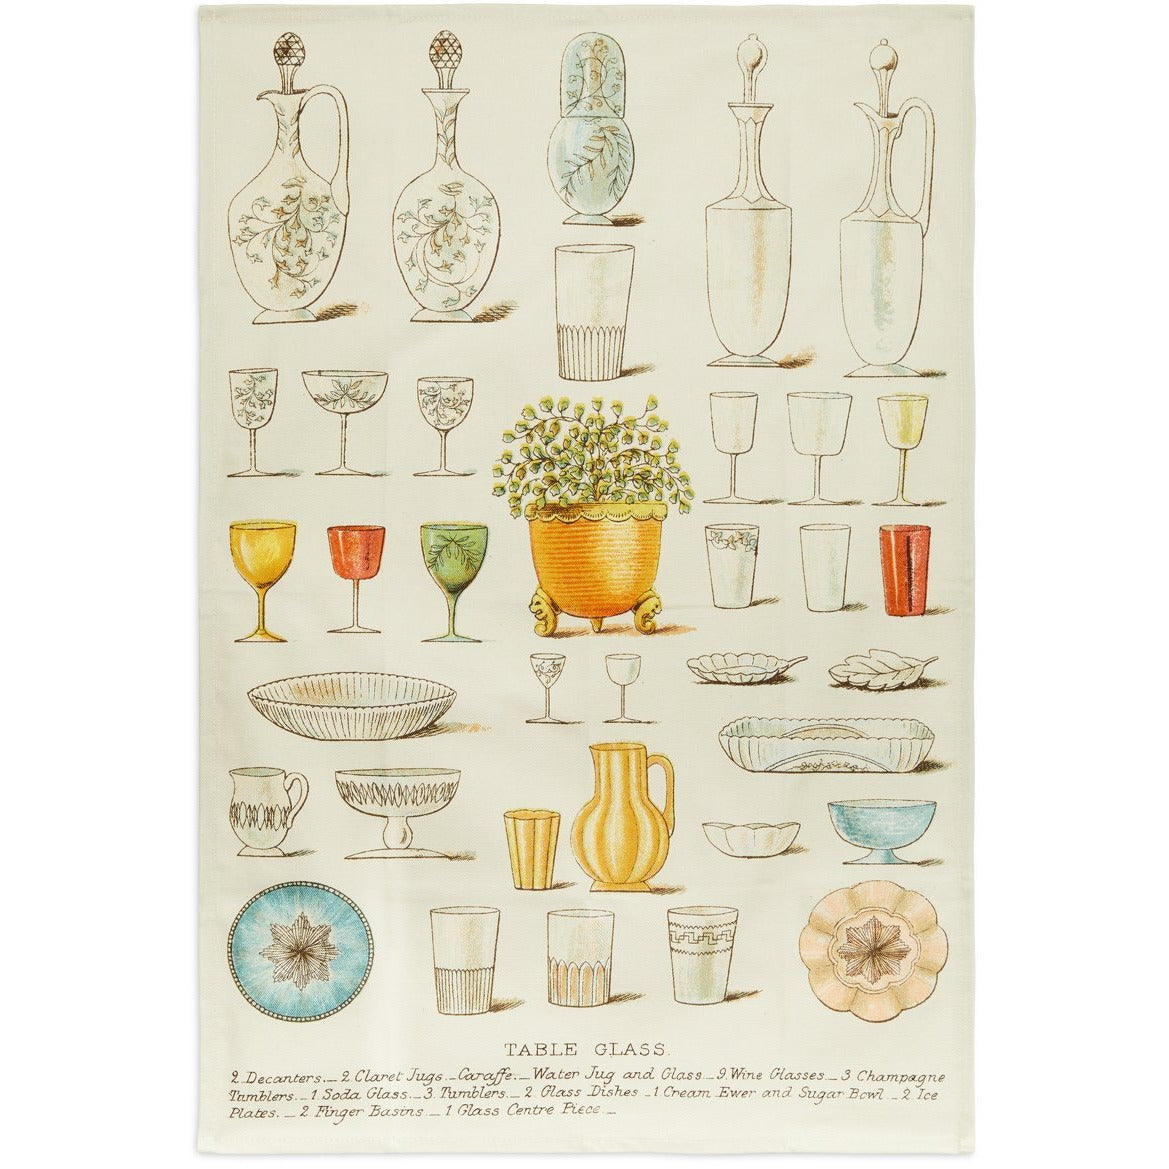 Tea towel with illustration of table glass, from Mrs Beeton's Book of Household Management. From the collection of the Cambridge University Library, brought to you by CuratingCambridge.co.uk